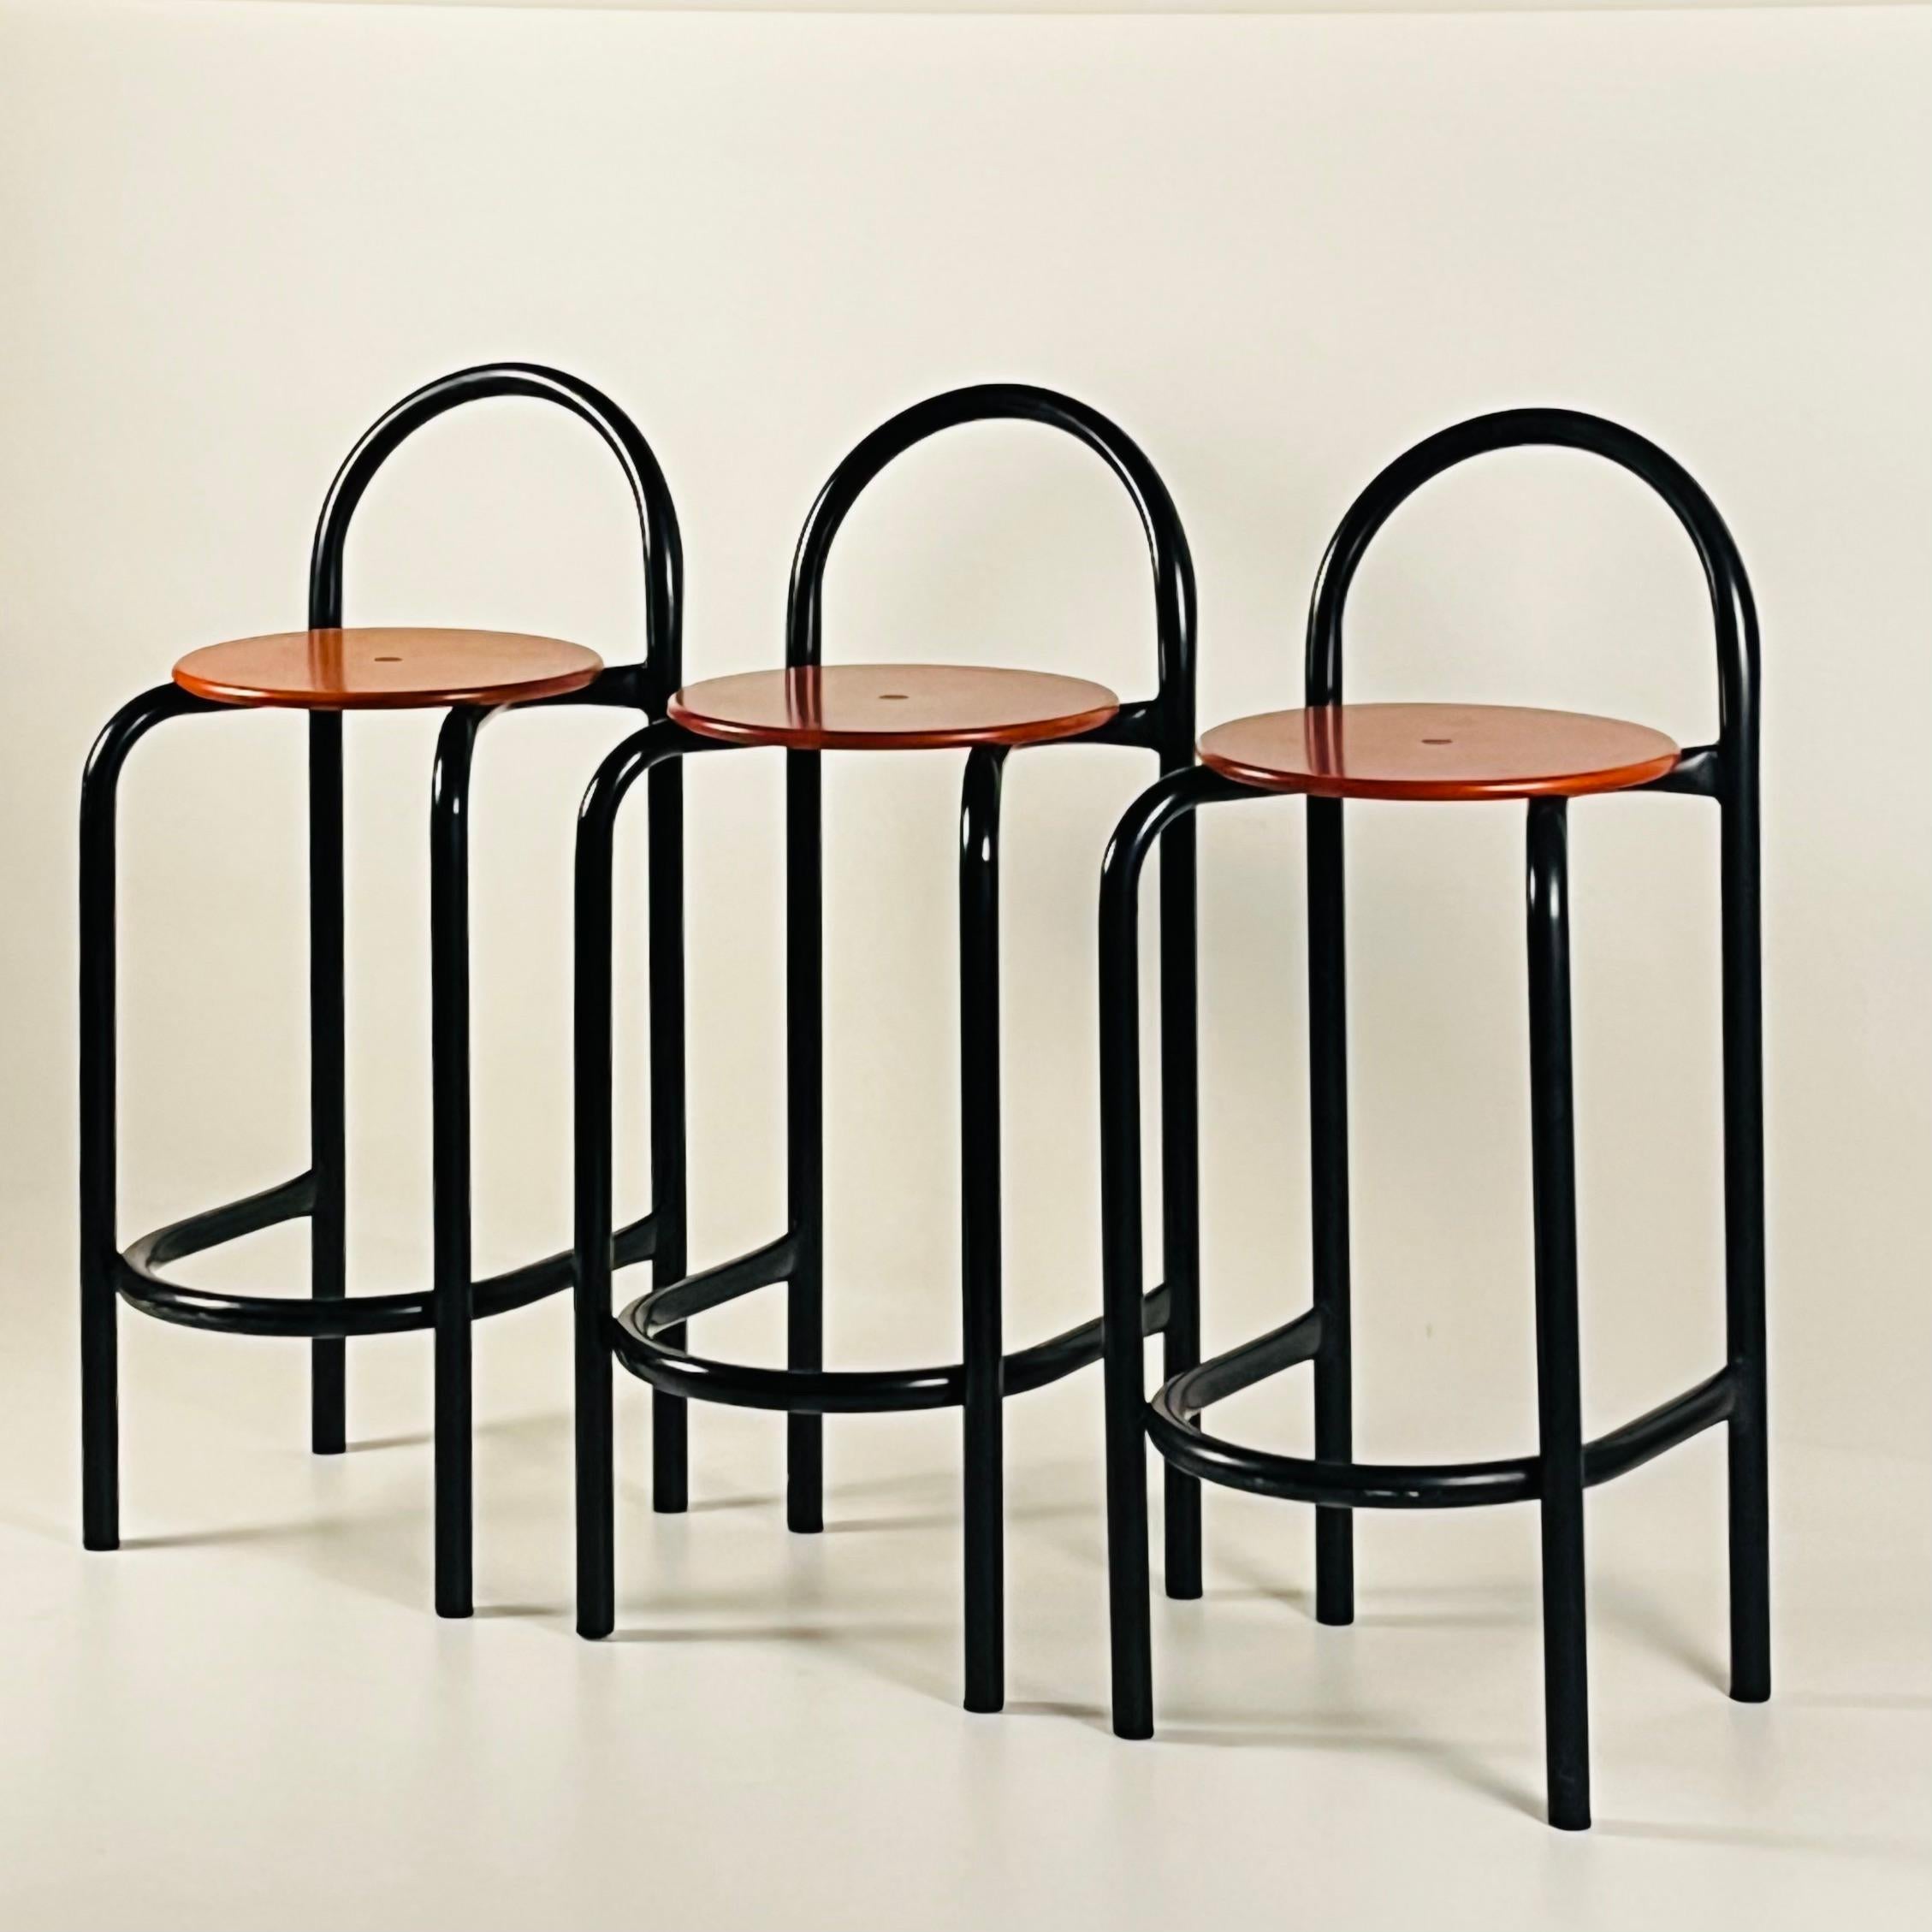 These sturdy stools feature powder-coated steel frames for durability and composite wood seats for comfort. Their cool minimalist design makes these stools a stylish choice for any modern bar area or kitchen counter. 